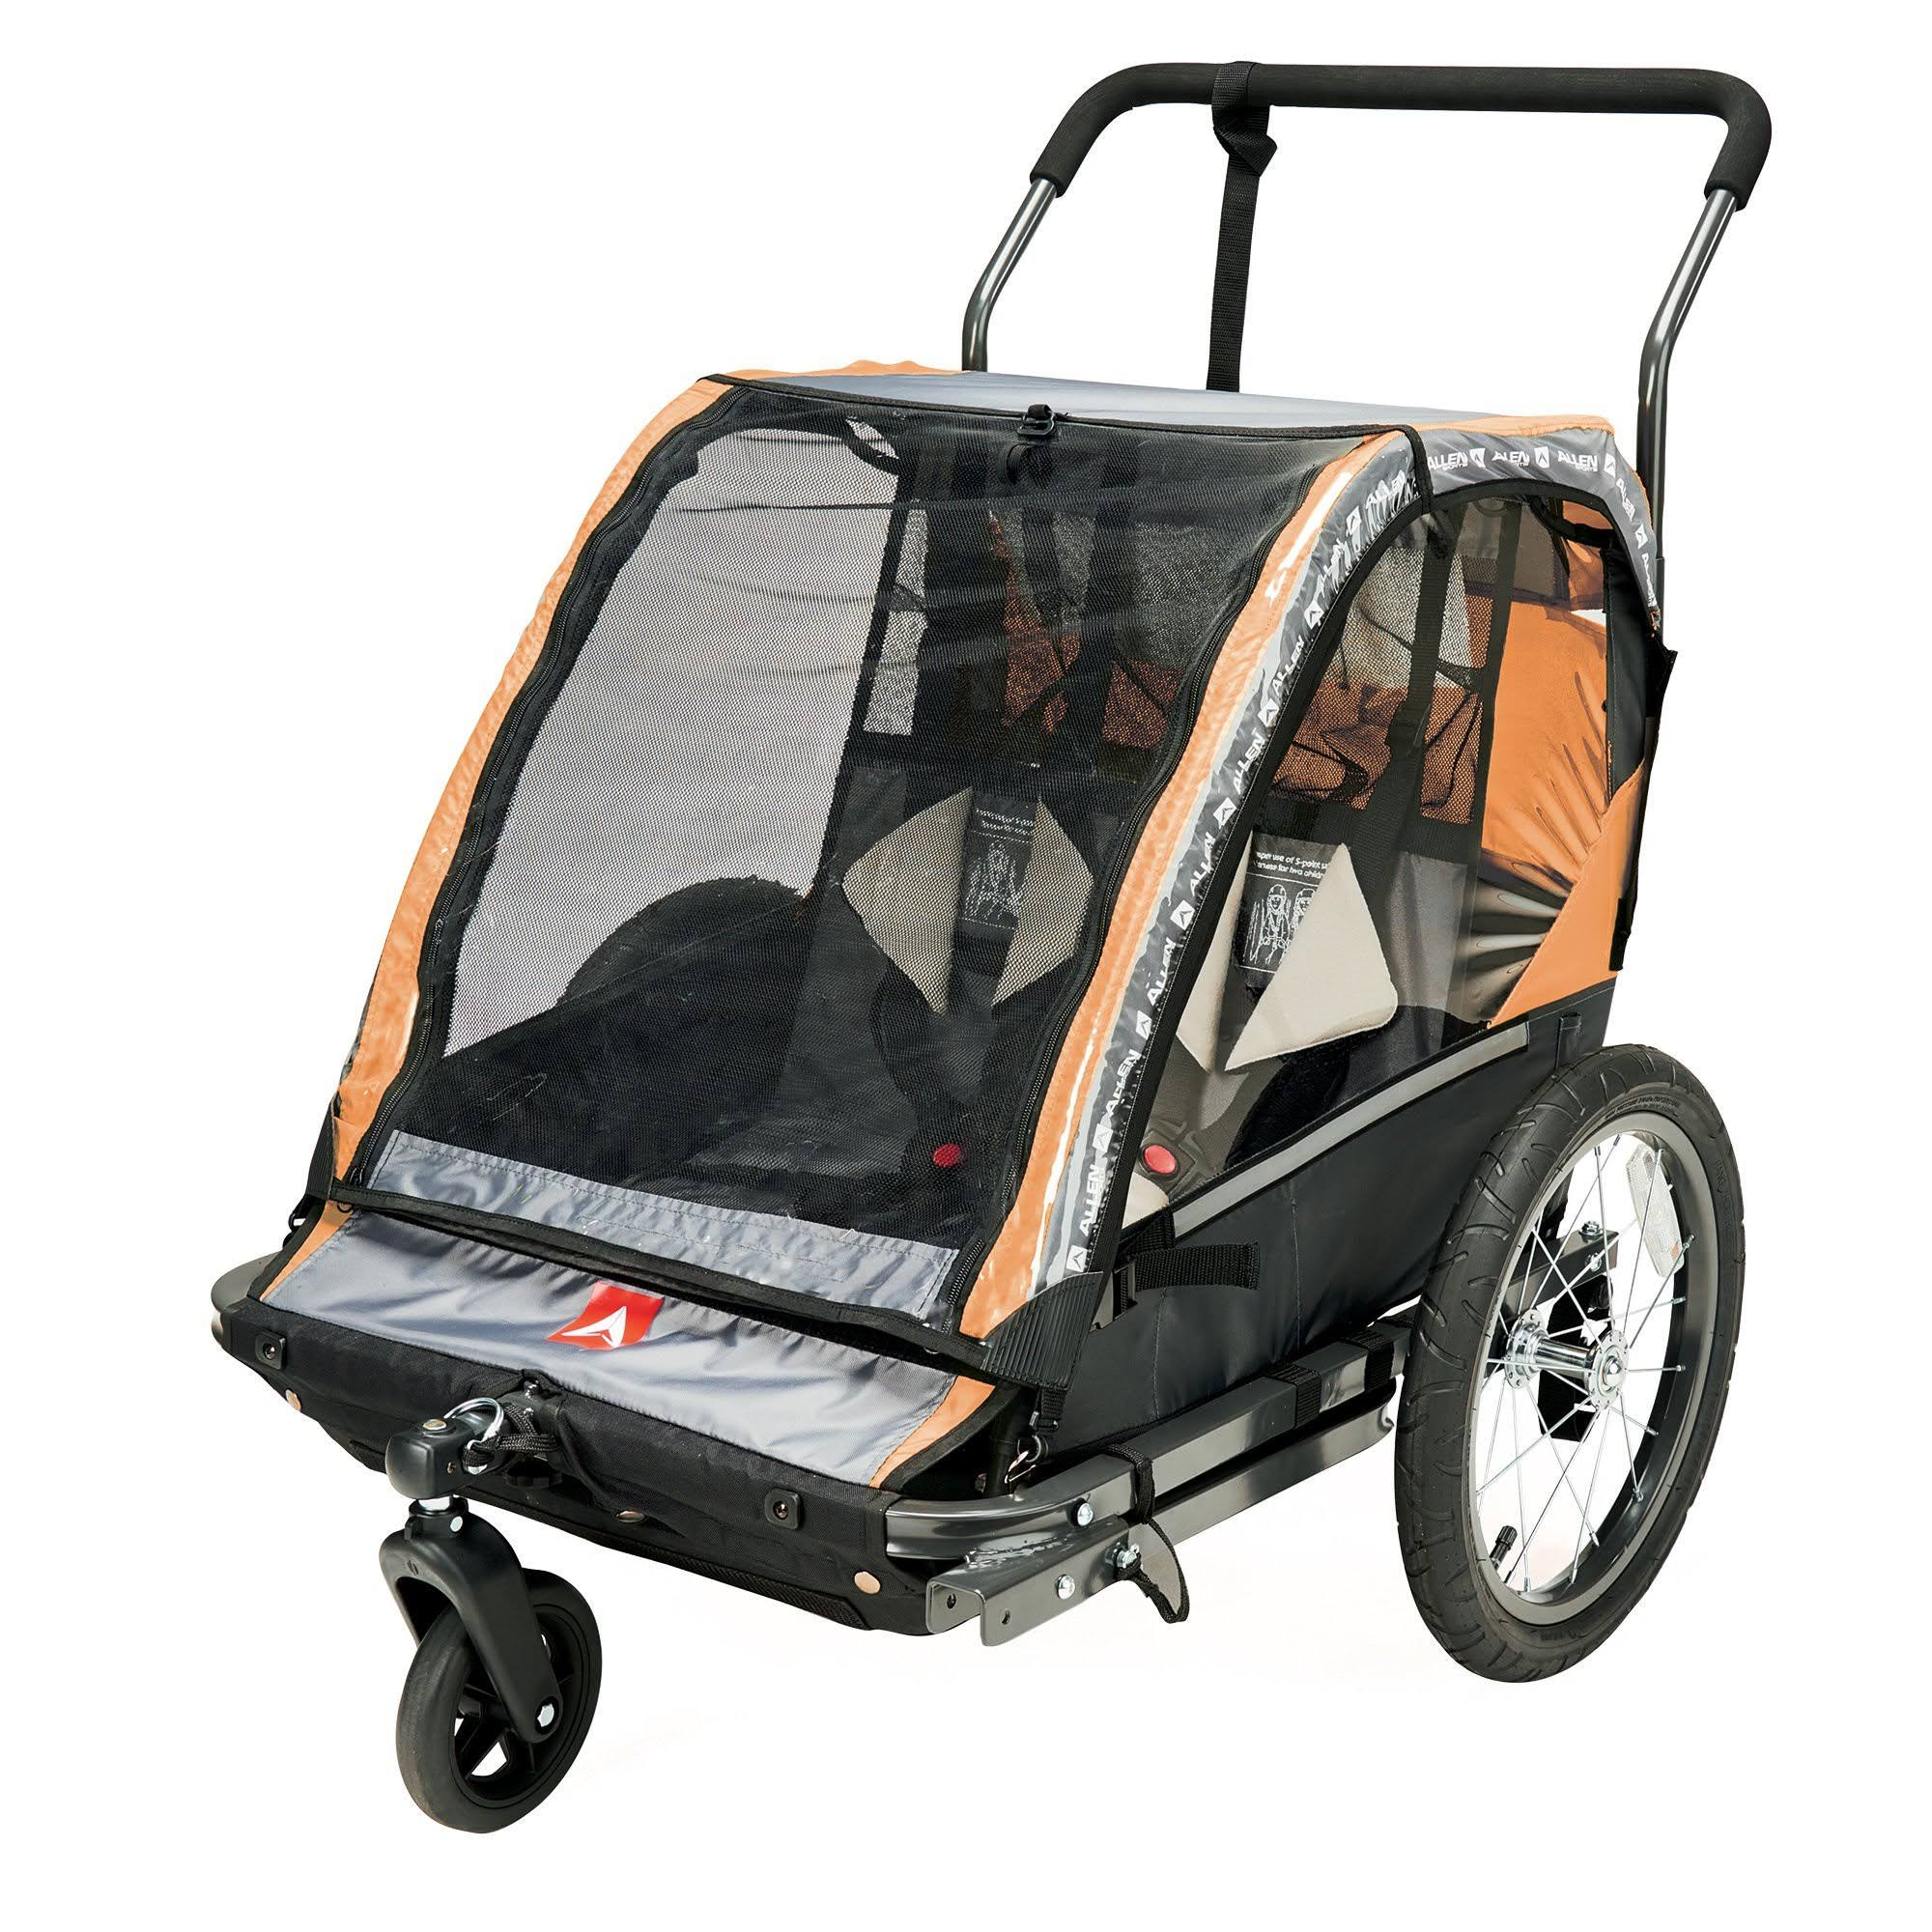 Allen Sports 2-Child Bicycle Trailer and Stroller, Model AS2, Orange